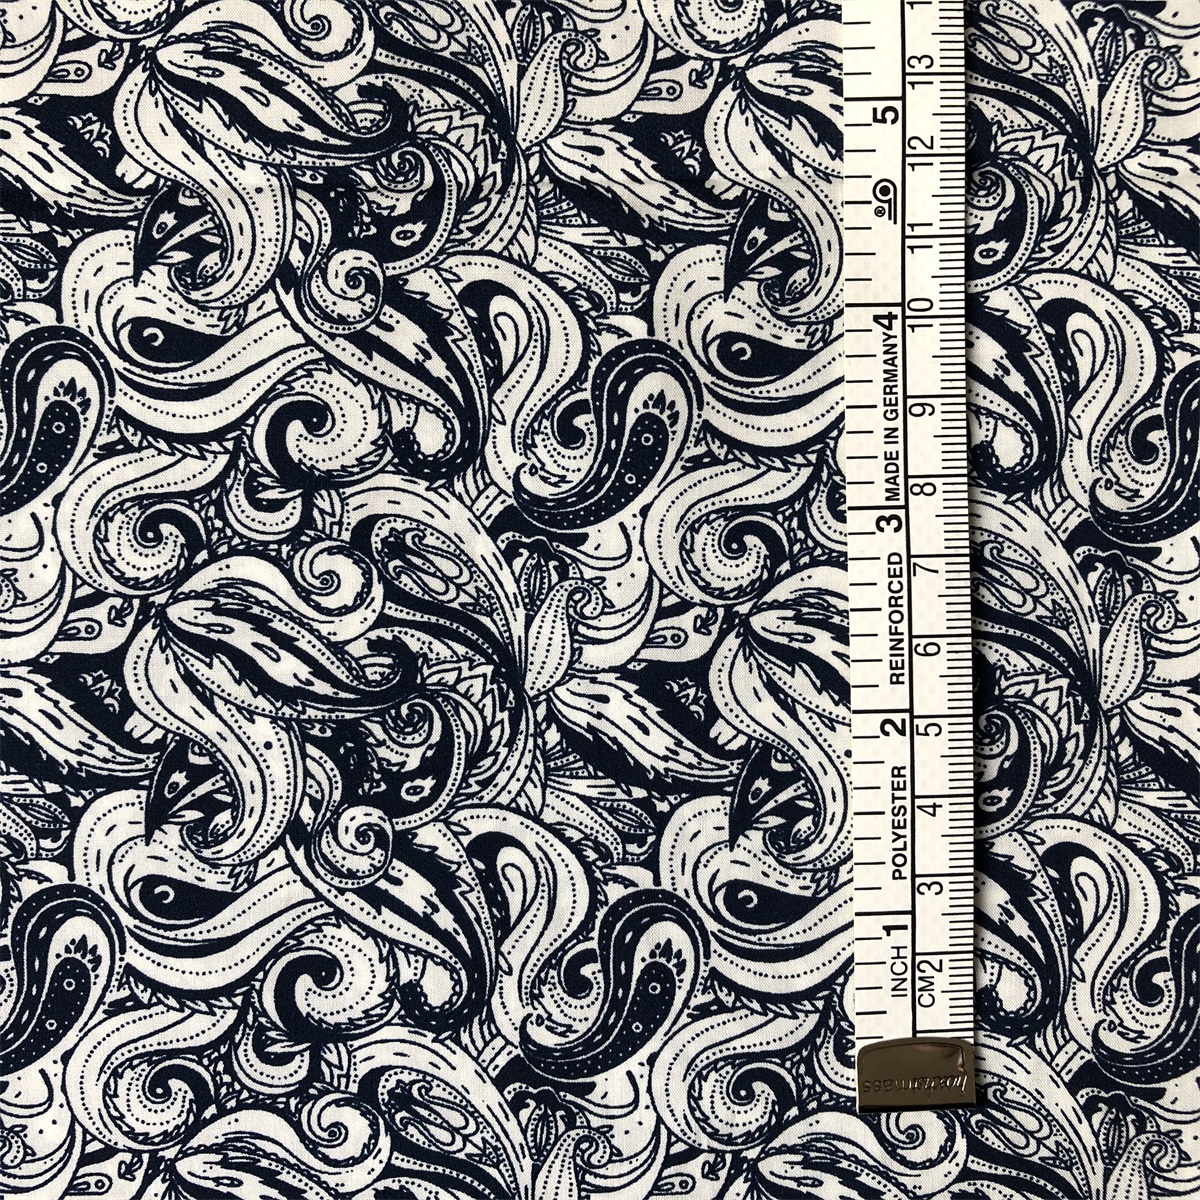 Sun-rising Textile Cotton Printed fabric customized new design 100% cotton poplin printed fabric for men's long sleeve shirts